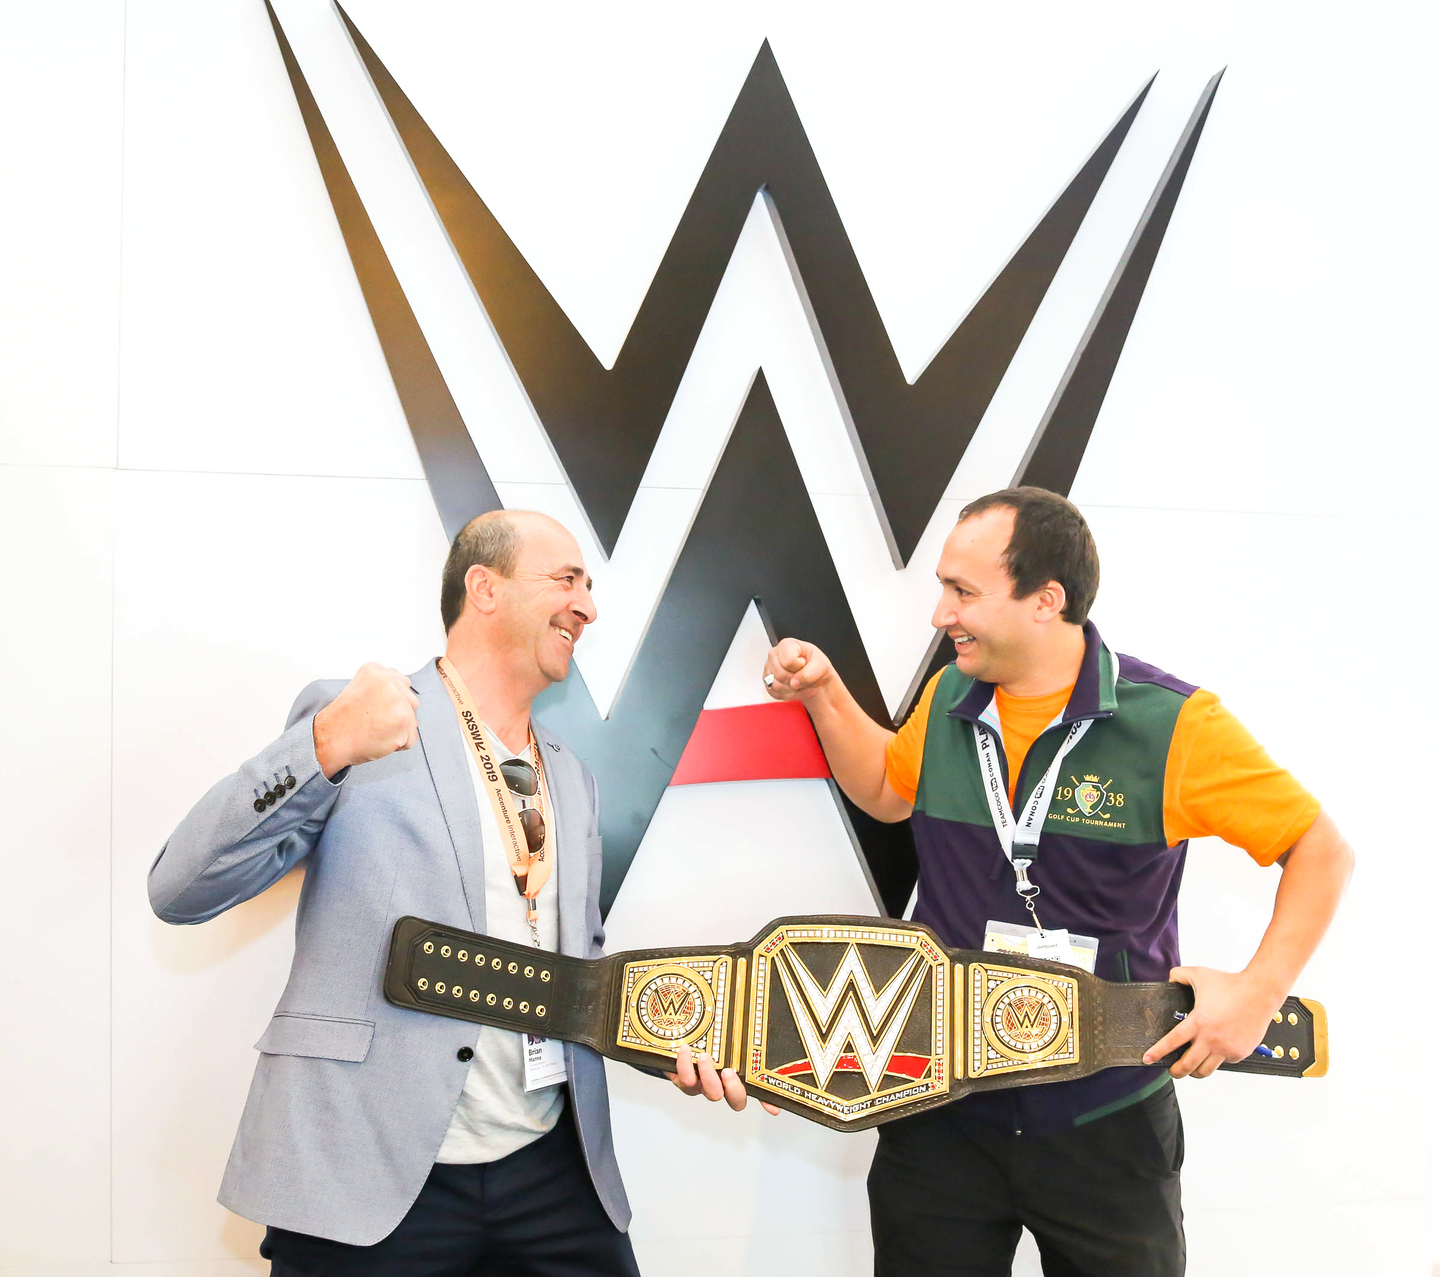 Be sure to stop by The WWE Lounge at the JW Marriott. Photo by Diego Donamaria